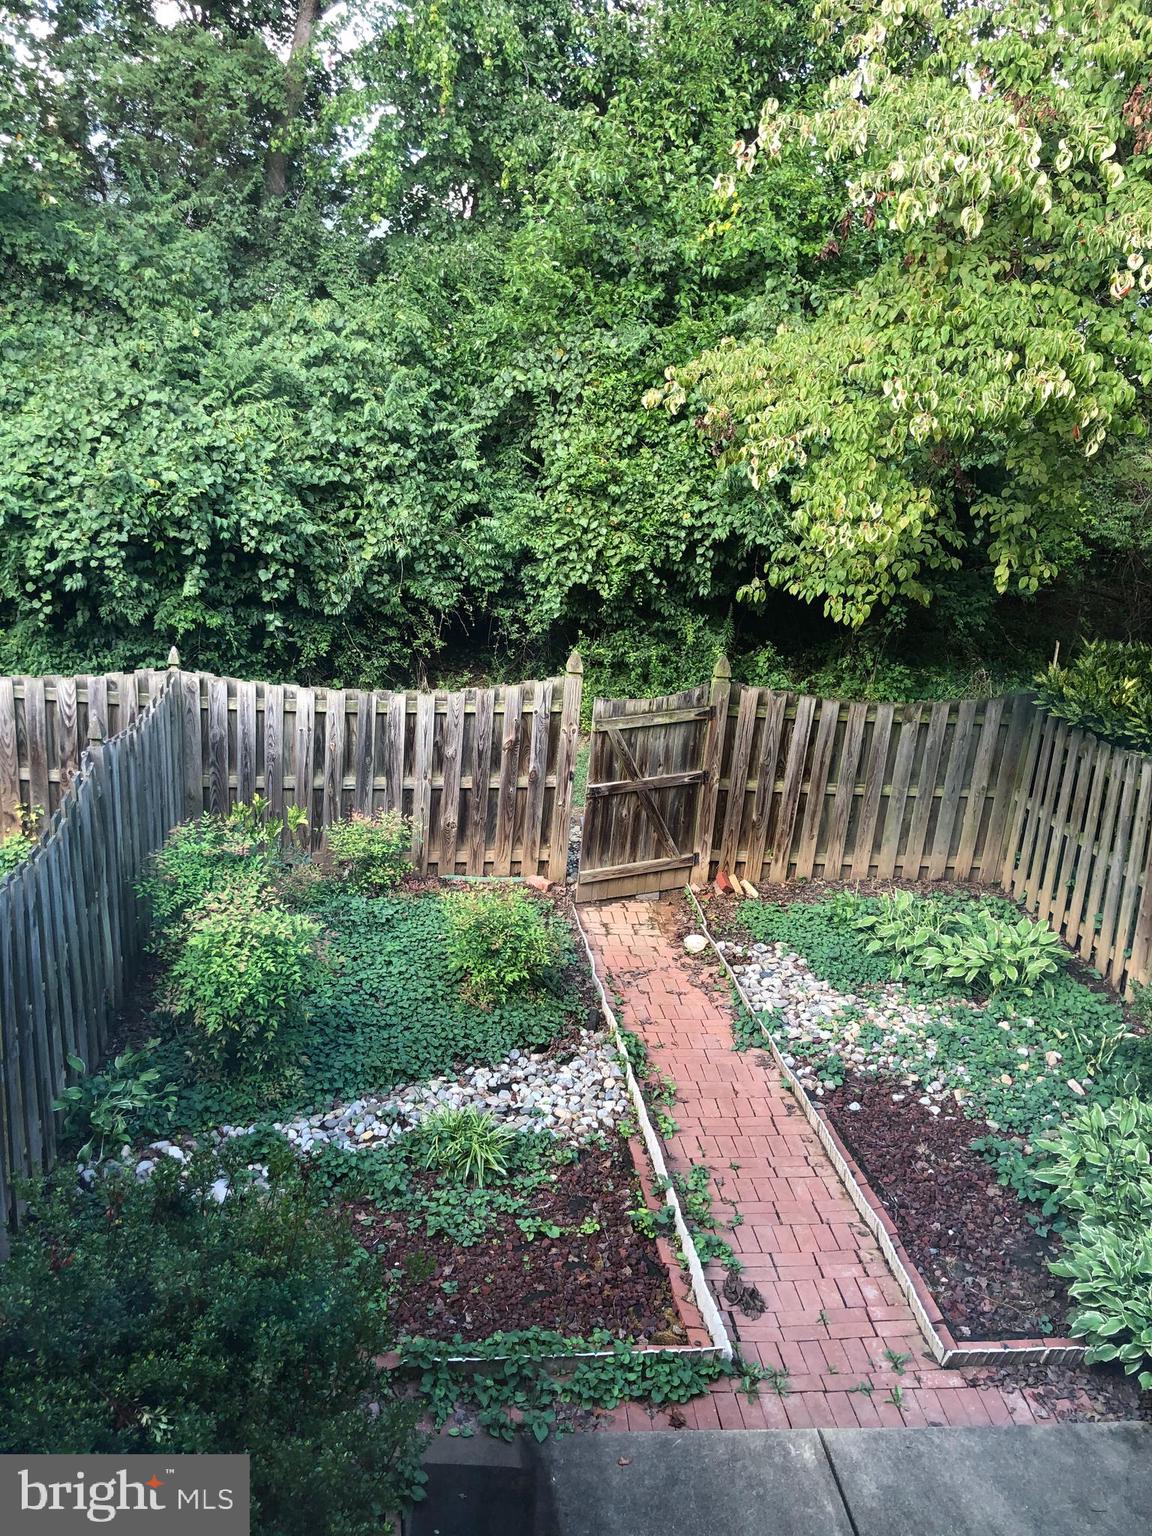 a view of garden with wooden fence